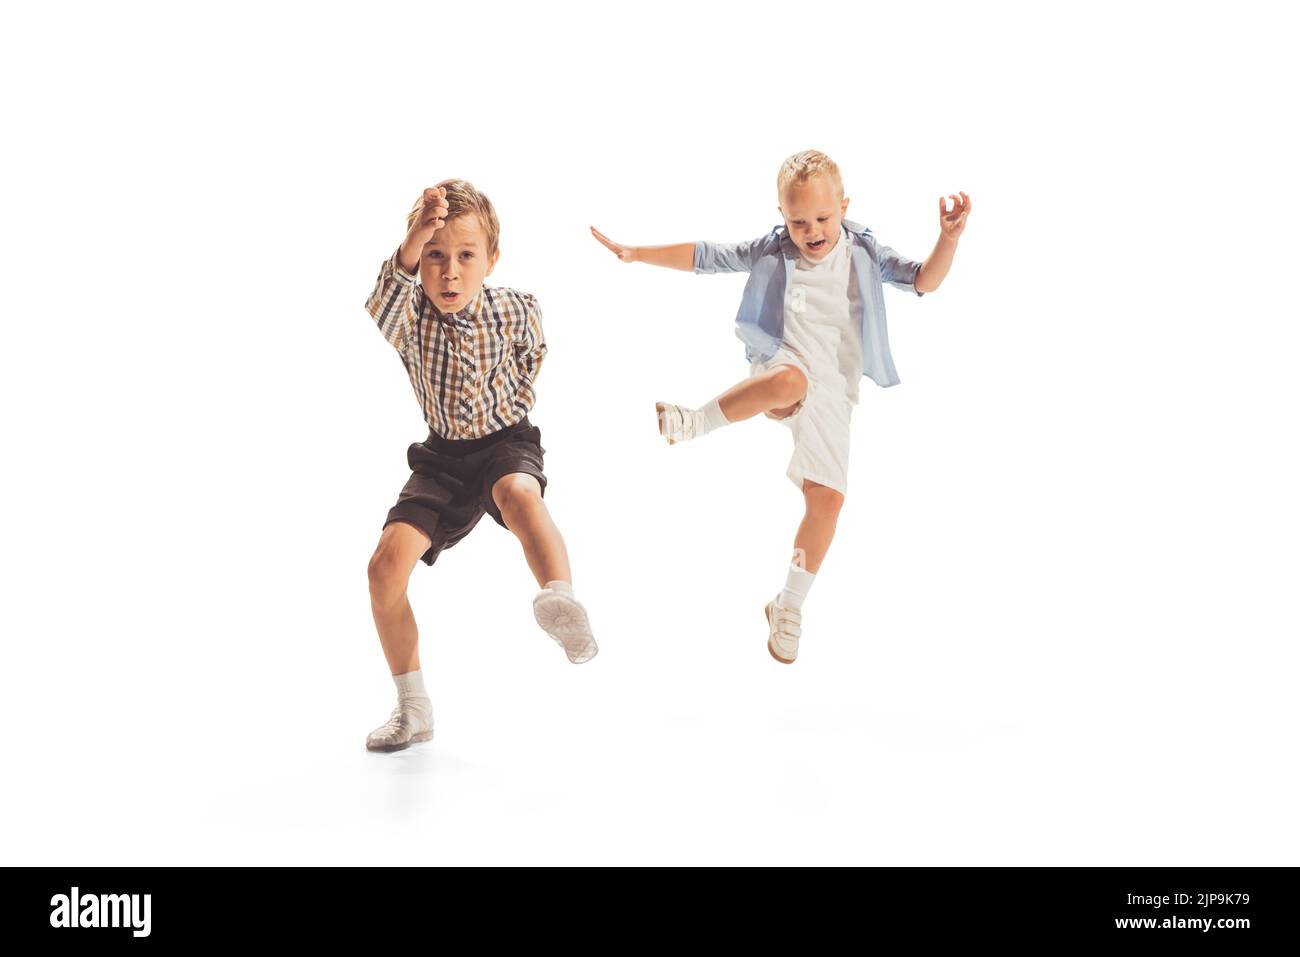 Portrait of two little boys, children playing together, running, jumping isolated over white studio background Stock Photo